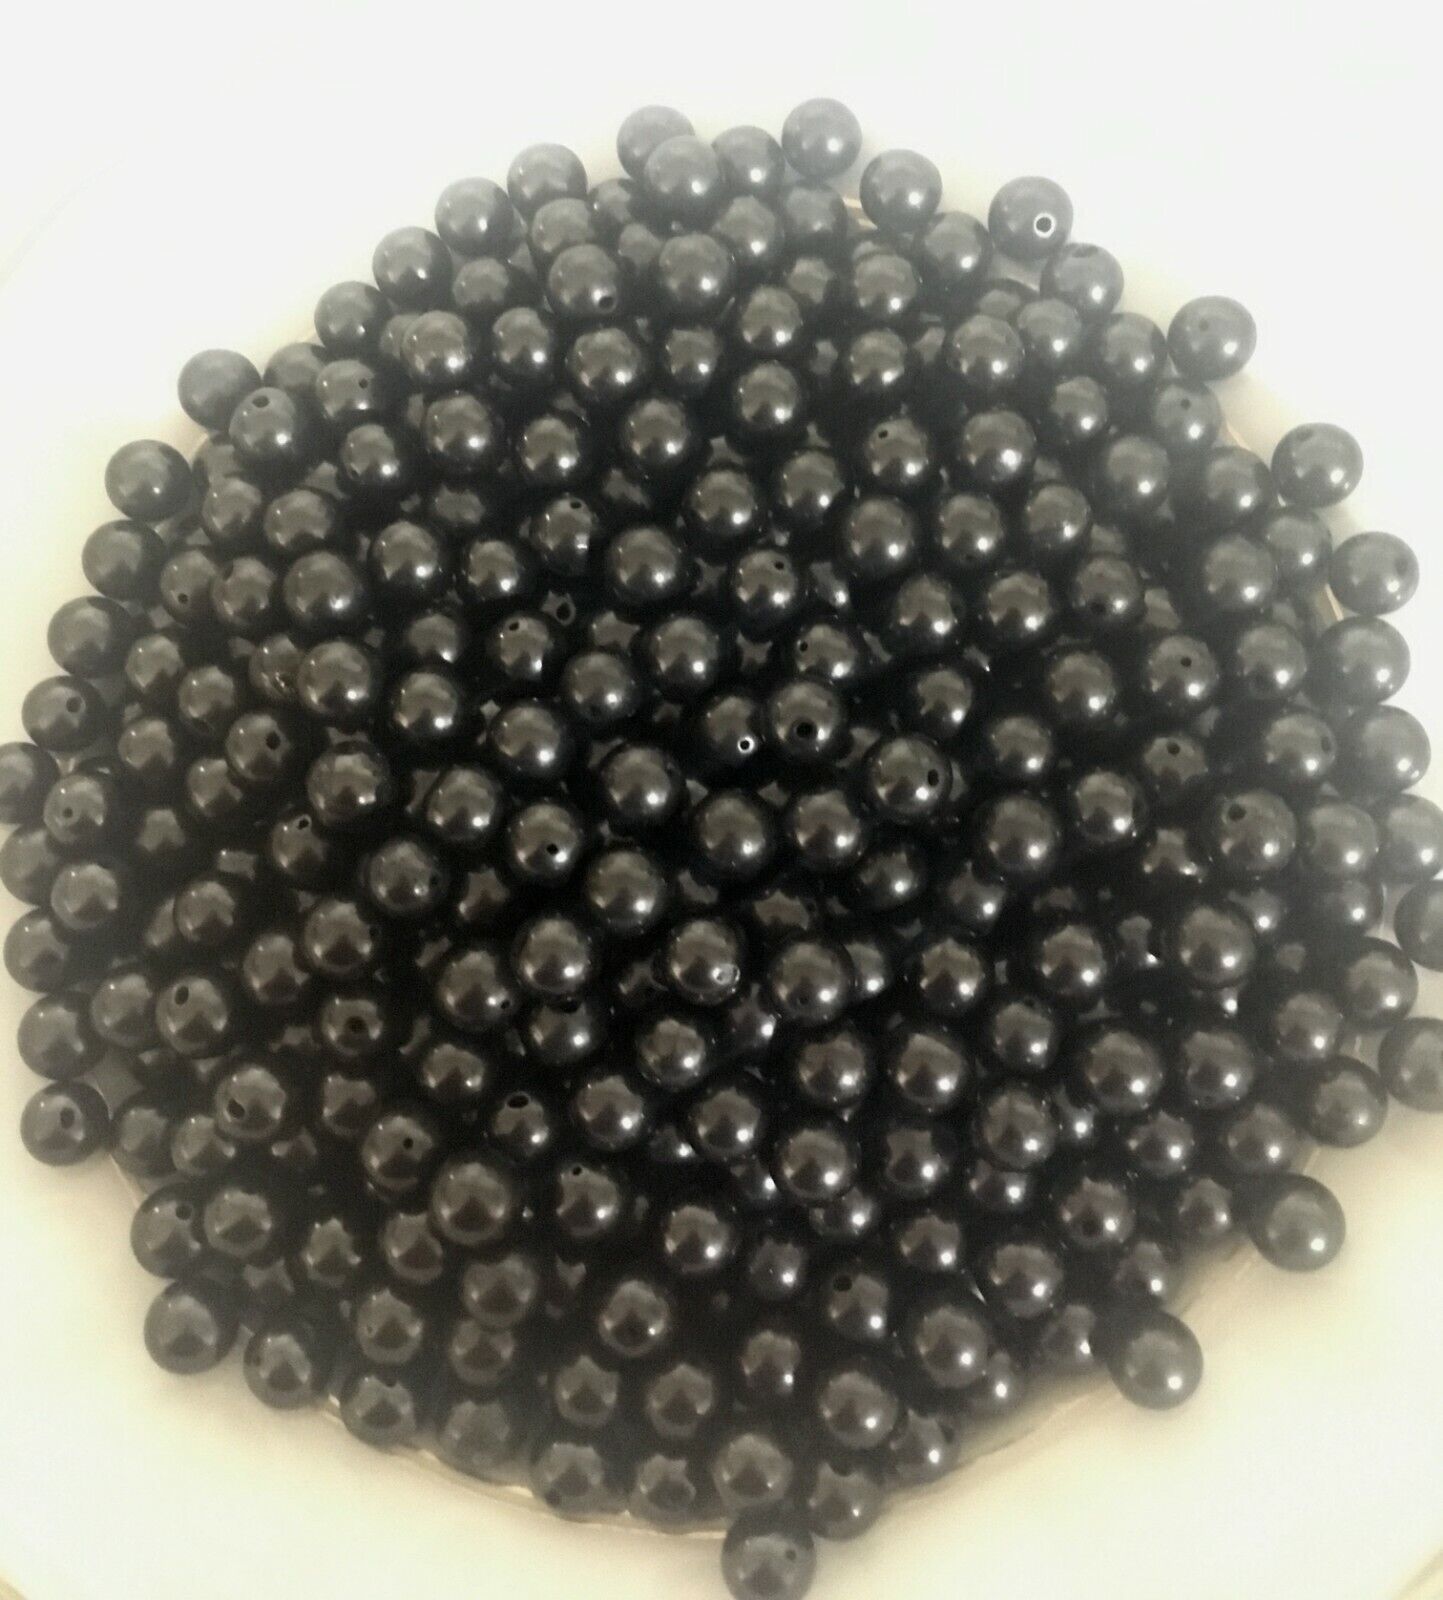 10 pcs Shungite Beads 8mm Polished Round with 1mm pre drilled hole - Loose Beads